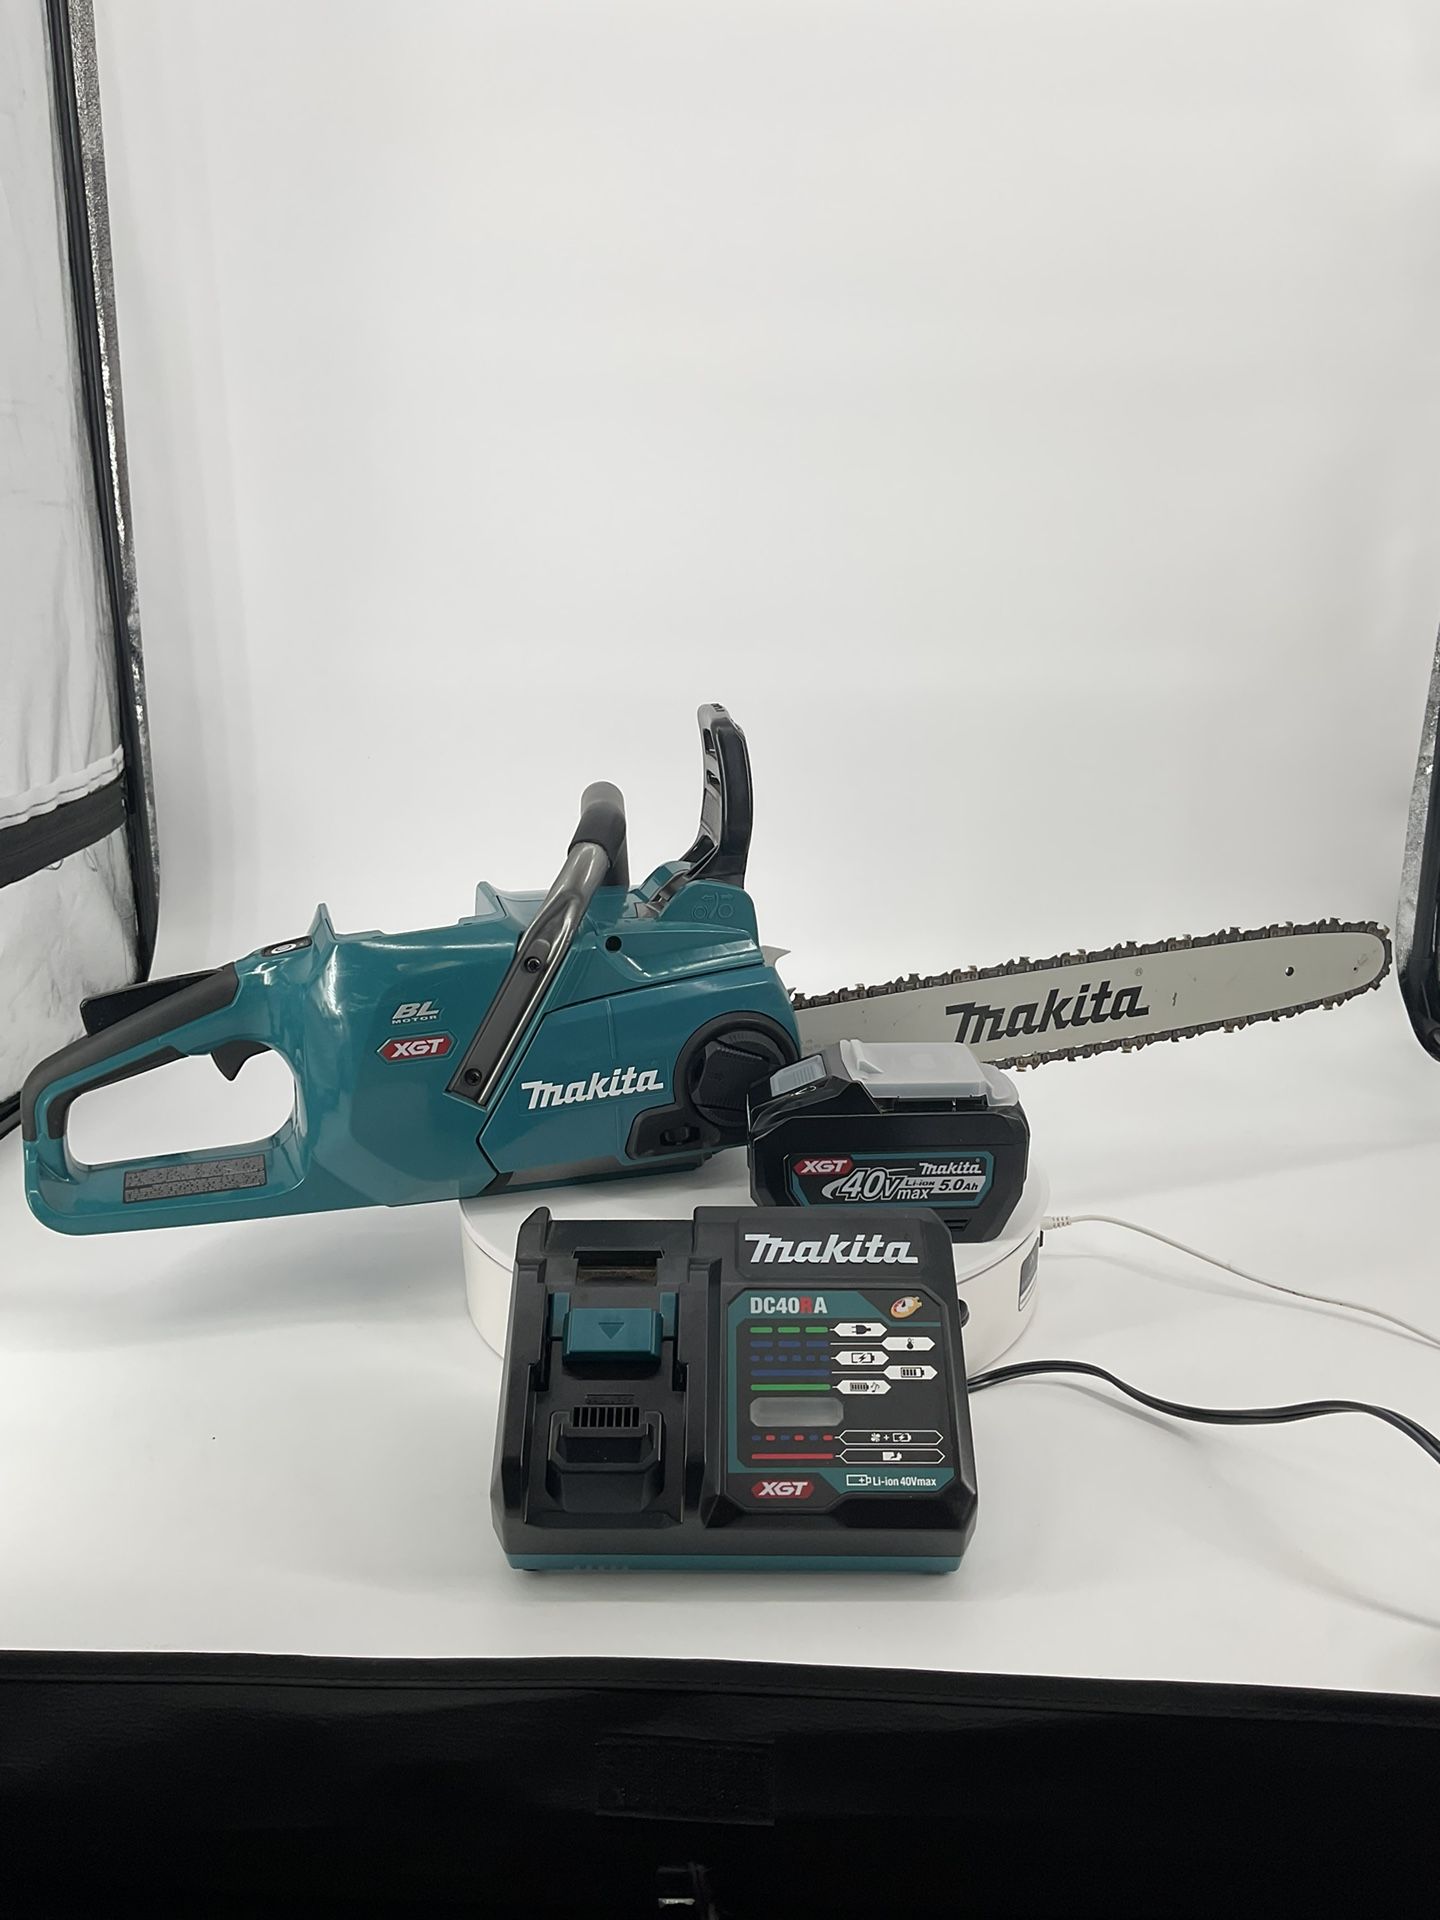 Makita XGT 18 in. 40V max Brushless Electric Cordless Battery Chainsaw Kit (5.0Ah) [USED LIKE NEW]